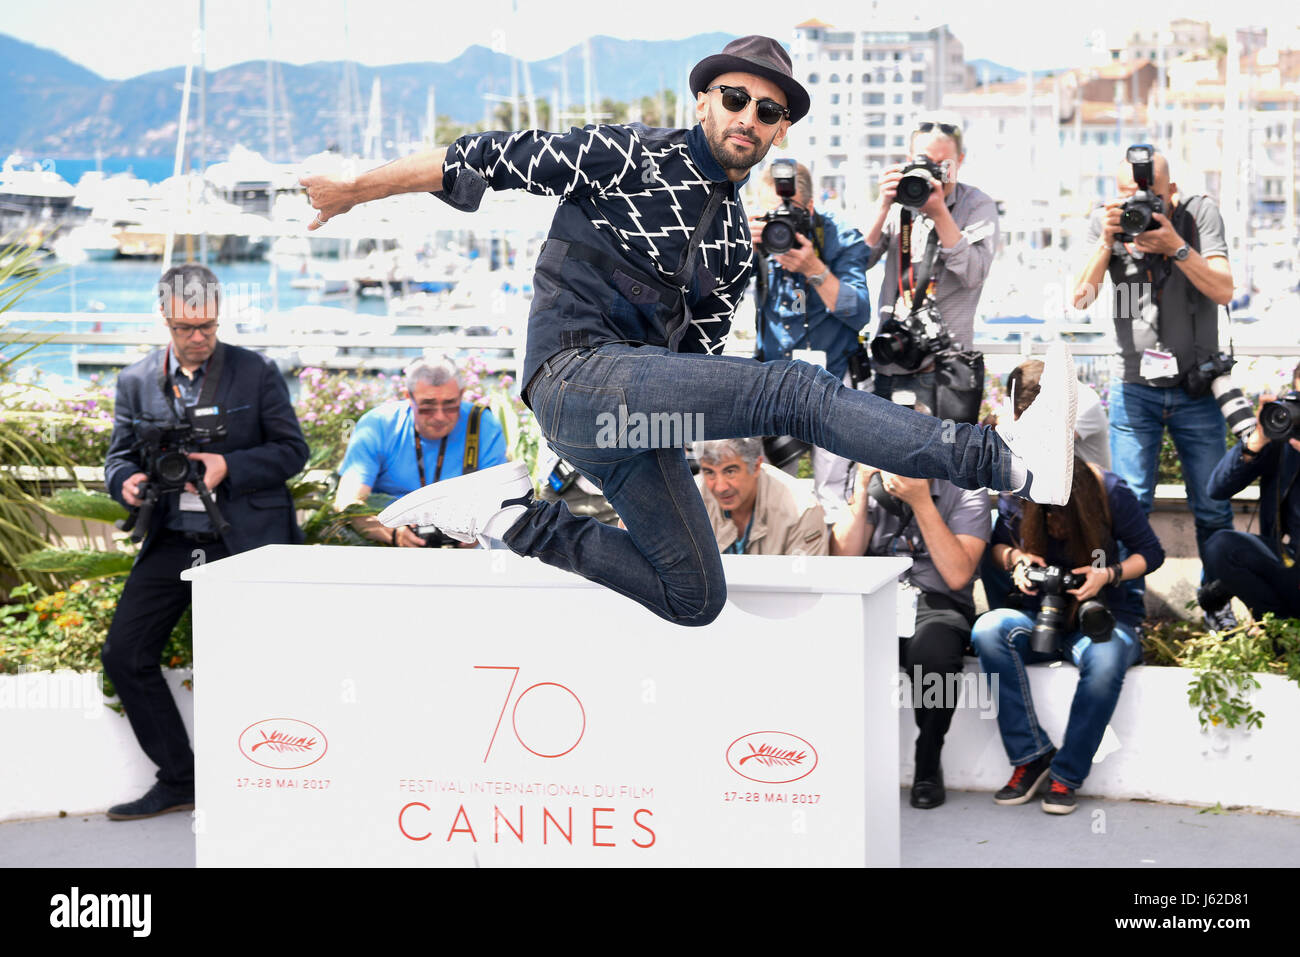 Cannes, France. 19th May, 2017. Director JR poses for a photocall in Cannes, France, on May 19, 2017. The film 'Faces, Places' co-directed by French directors Agnes Varda and JR will be screened during the 70th Cannes Film Festival. Credit: Chen Yichen/Xinhua/Alamy Live News Stock Photo